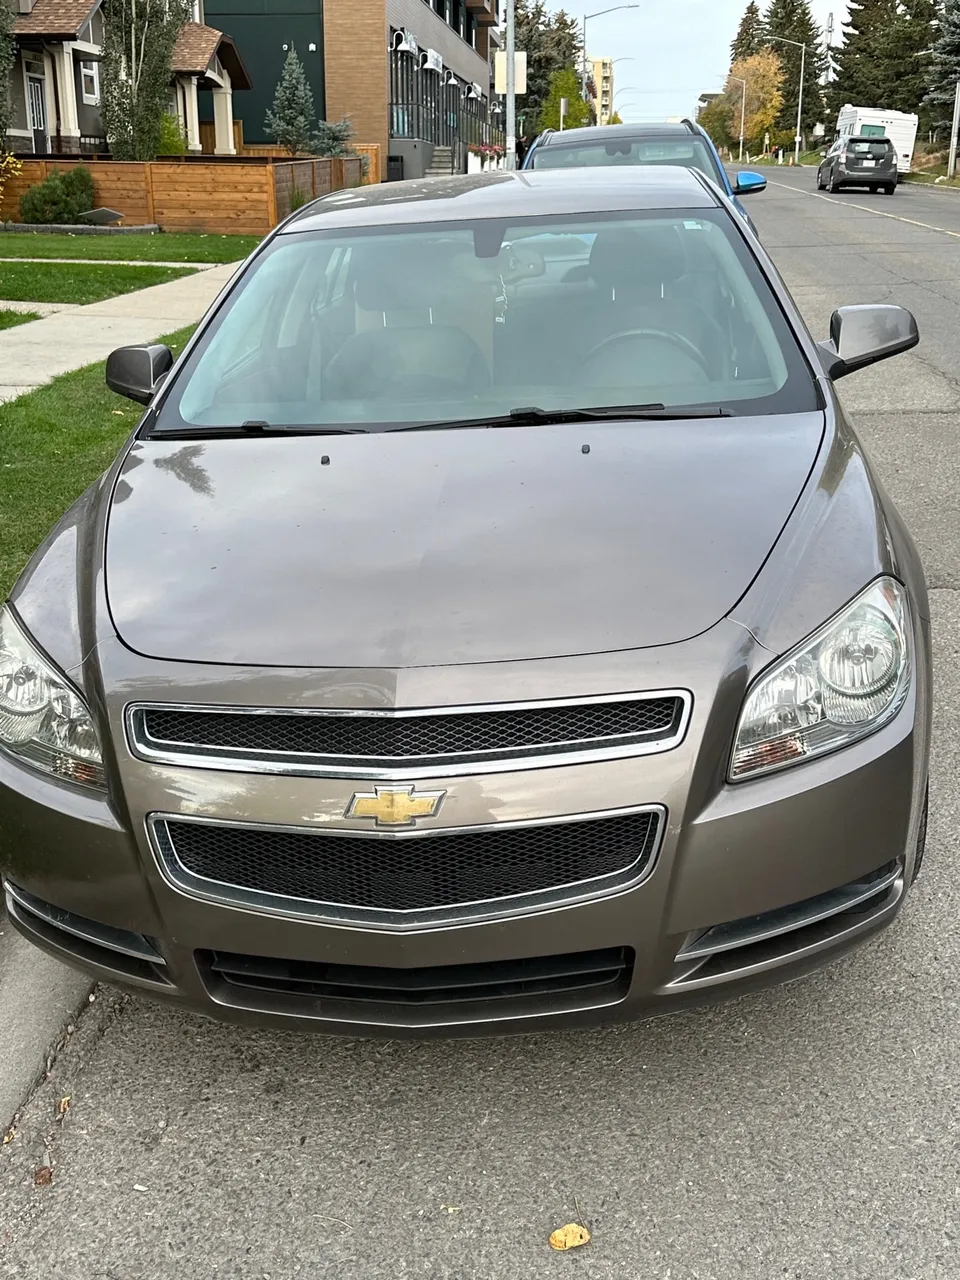 Chevrolet Malibu. LT. Private Sell. Absolutely perfect car.